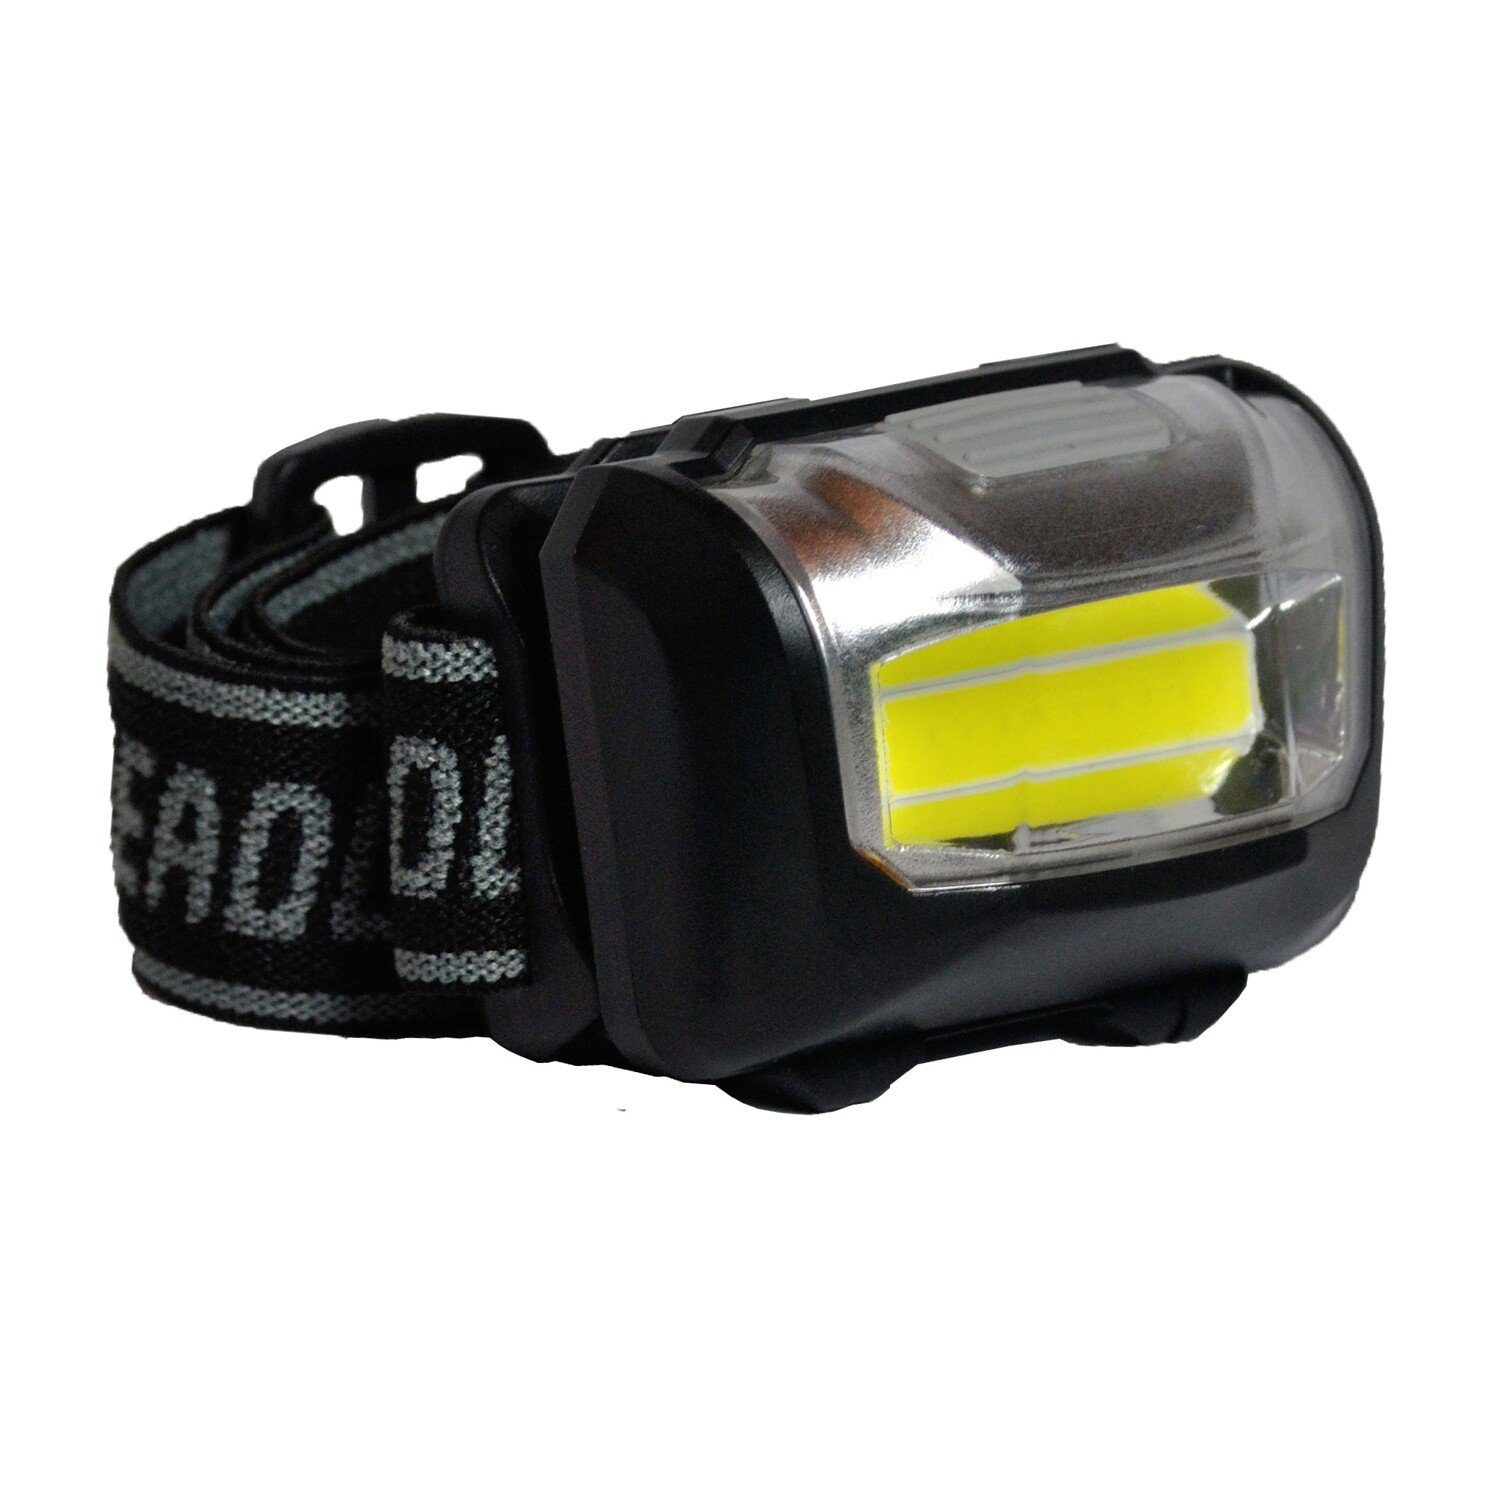 LANTERNA LED SPACER headlamp (3W COB)  high power/low power/strobe/off, battery:3 x AAA "SP-HLAMP" (include TV 0.18lei) thumb